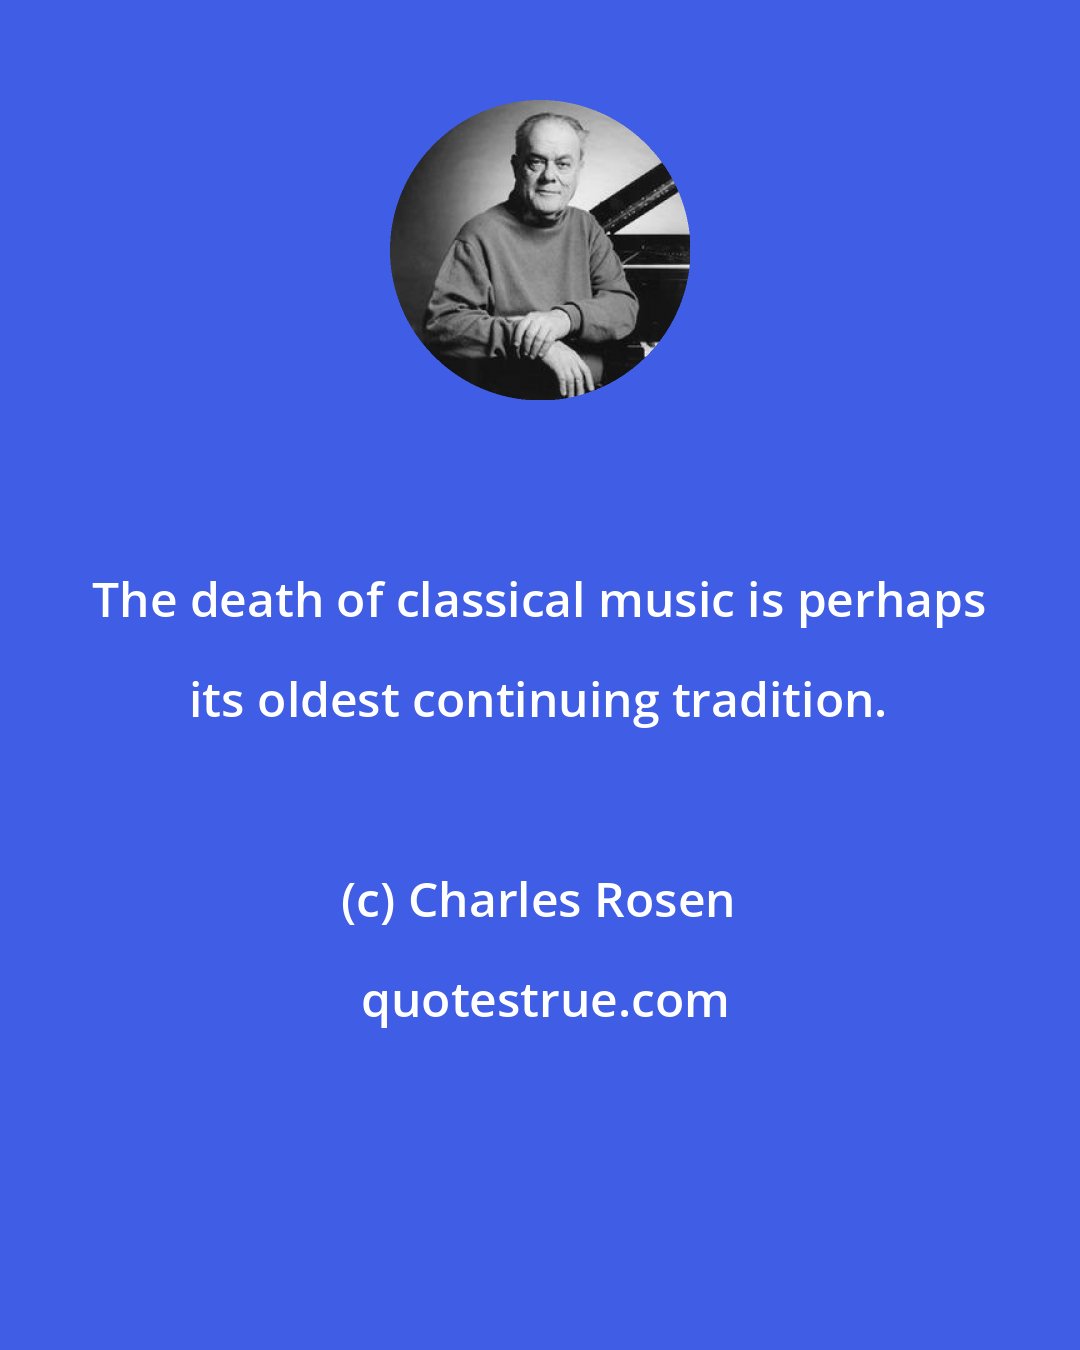 Charles Rosen: The death of classical music is perhaps its oldest continuing tradition.